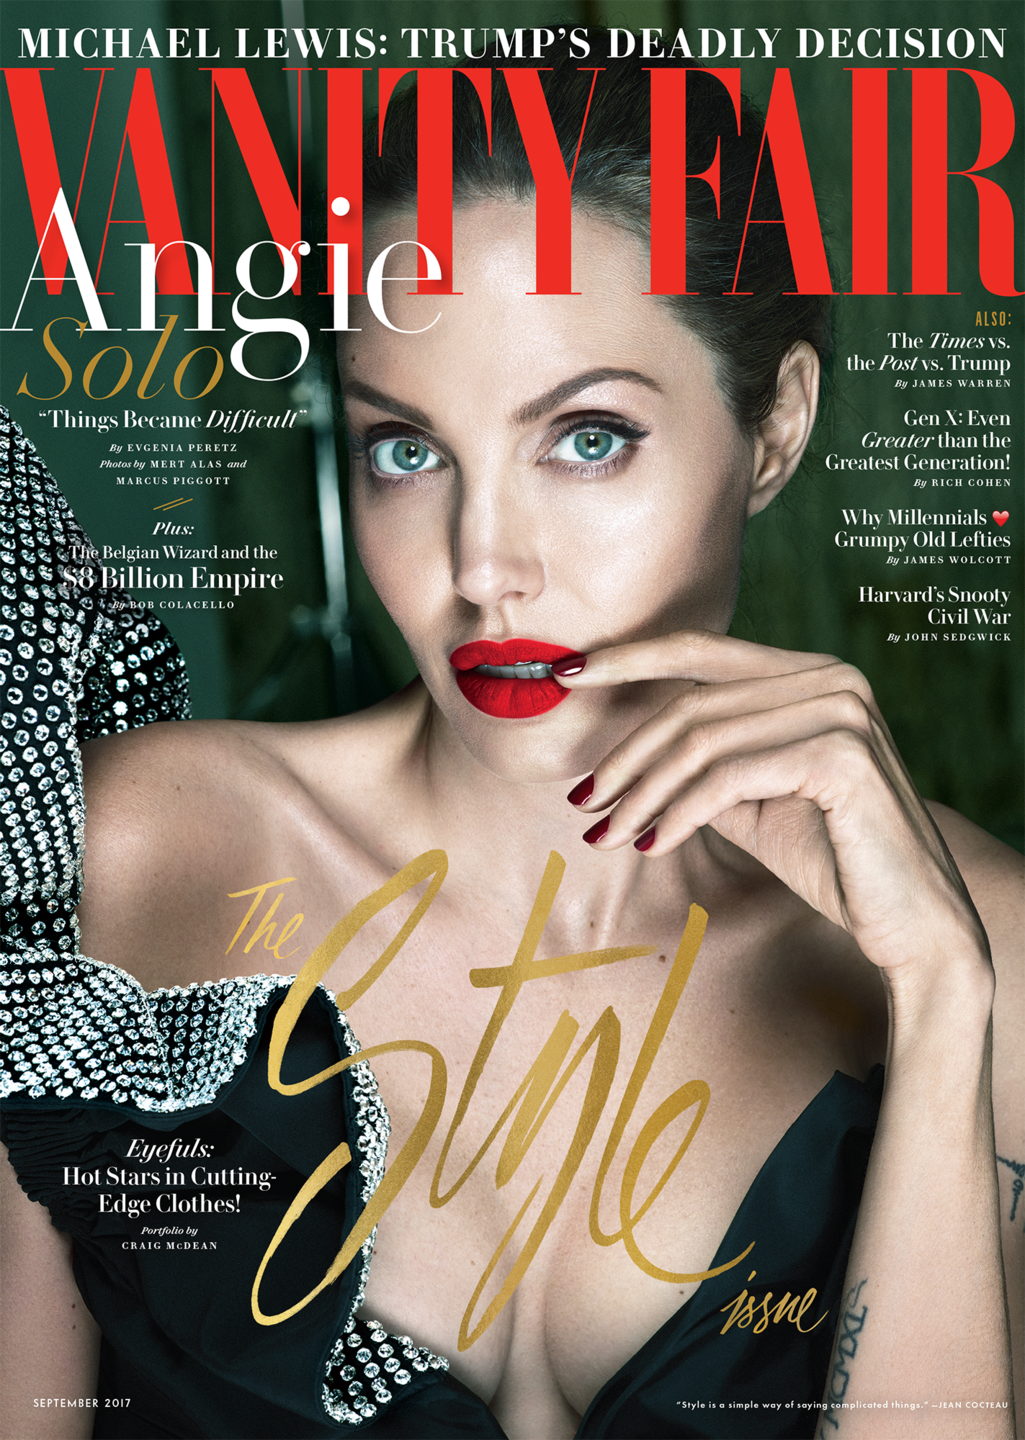 Angelina Jolie Covers Vanity Fair In First Significant Interview Since Split With Brad Pitt